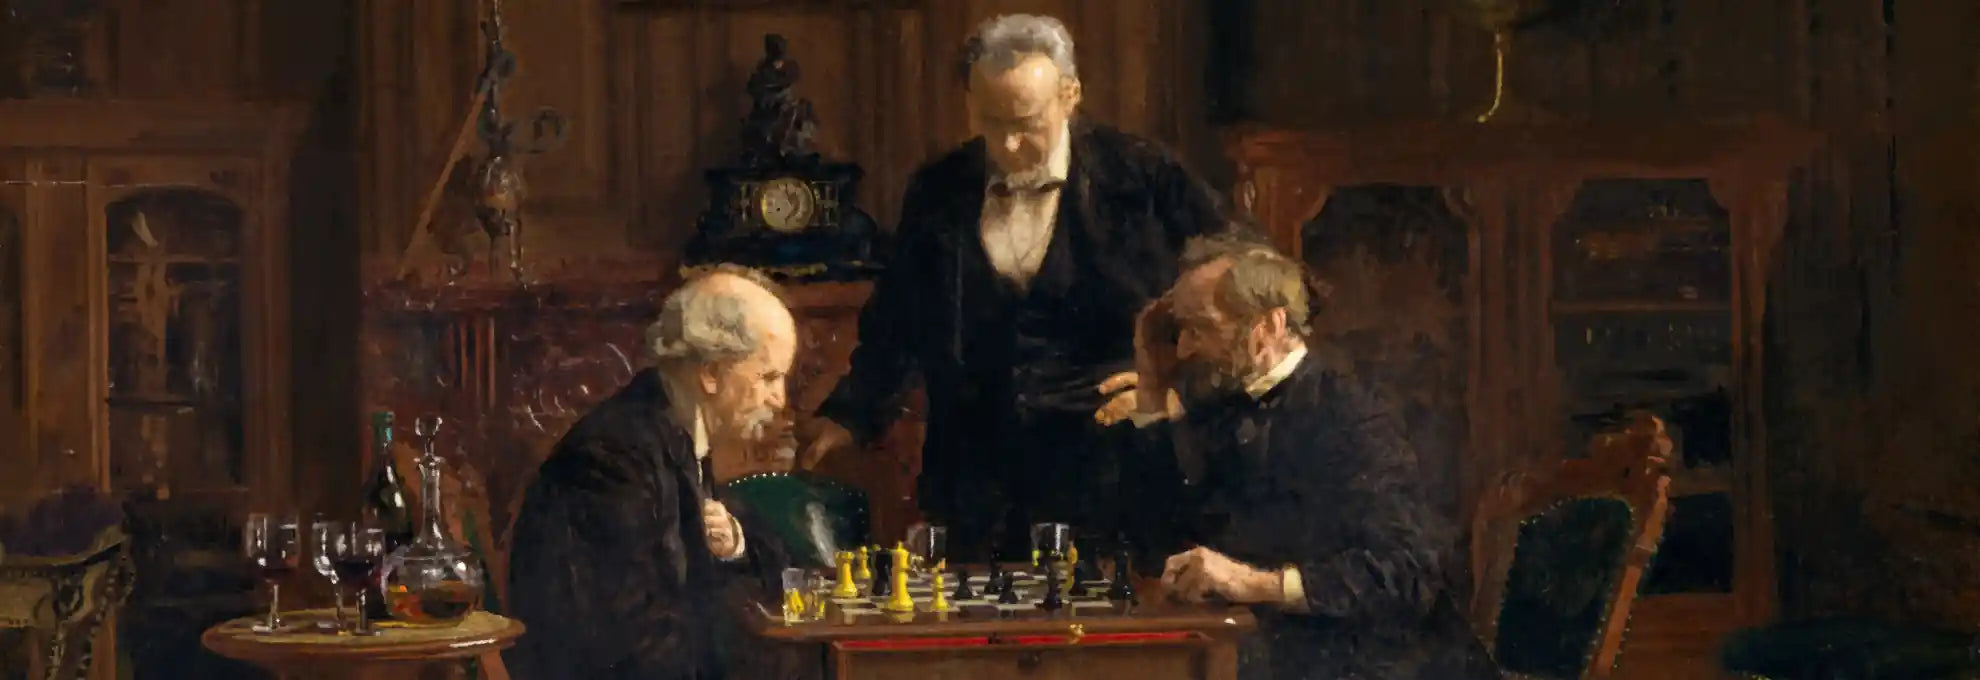 The Chess Players by Thomas Eakins 1876 America